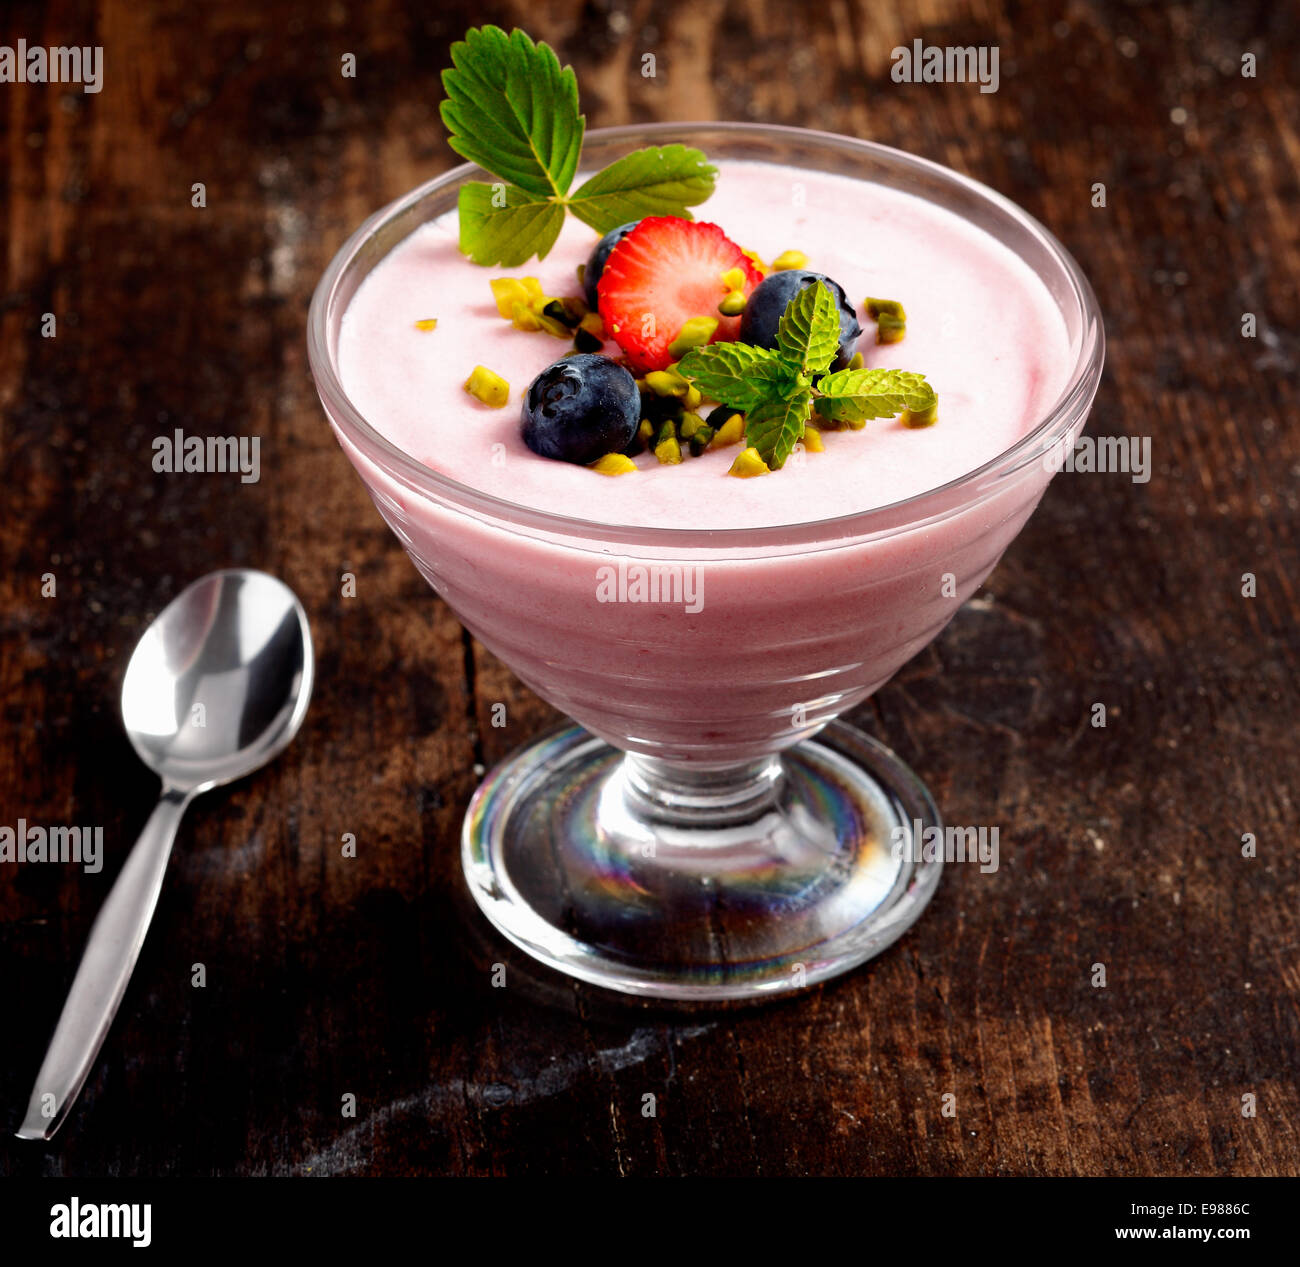 Sweet dessert of strawberry cream. Topped with some blueberries and a leaf of mint. Standing on a rustic wooden background. Stock Photo